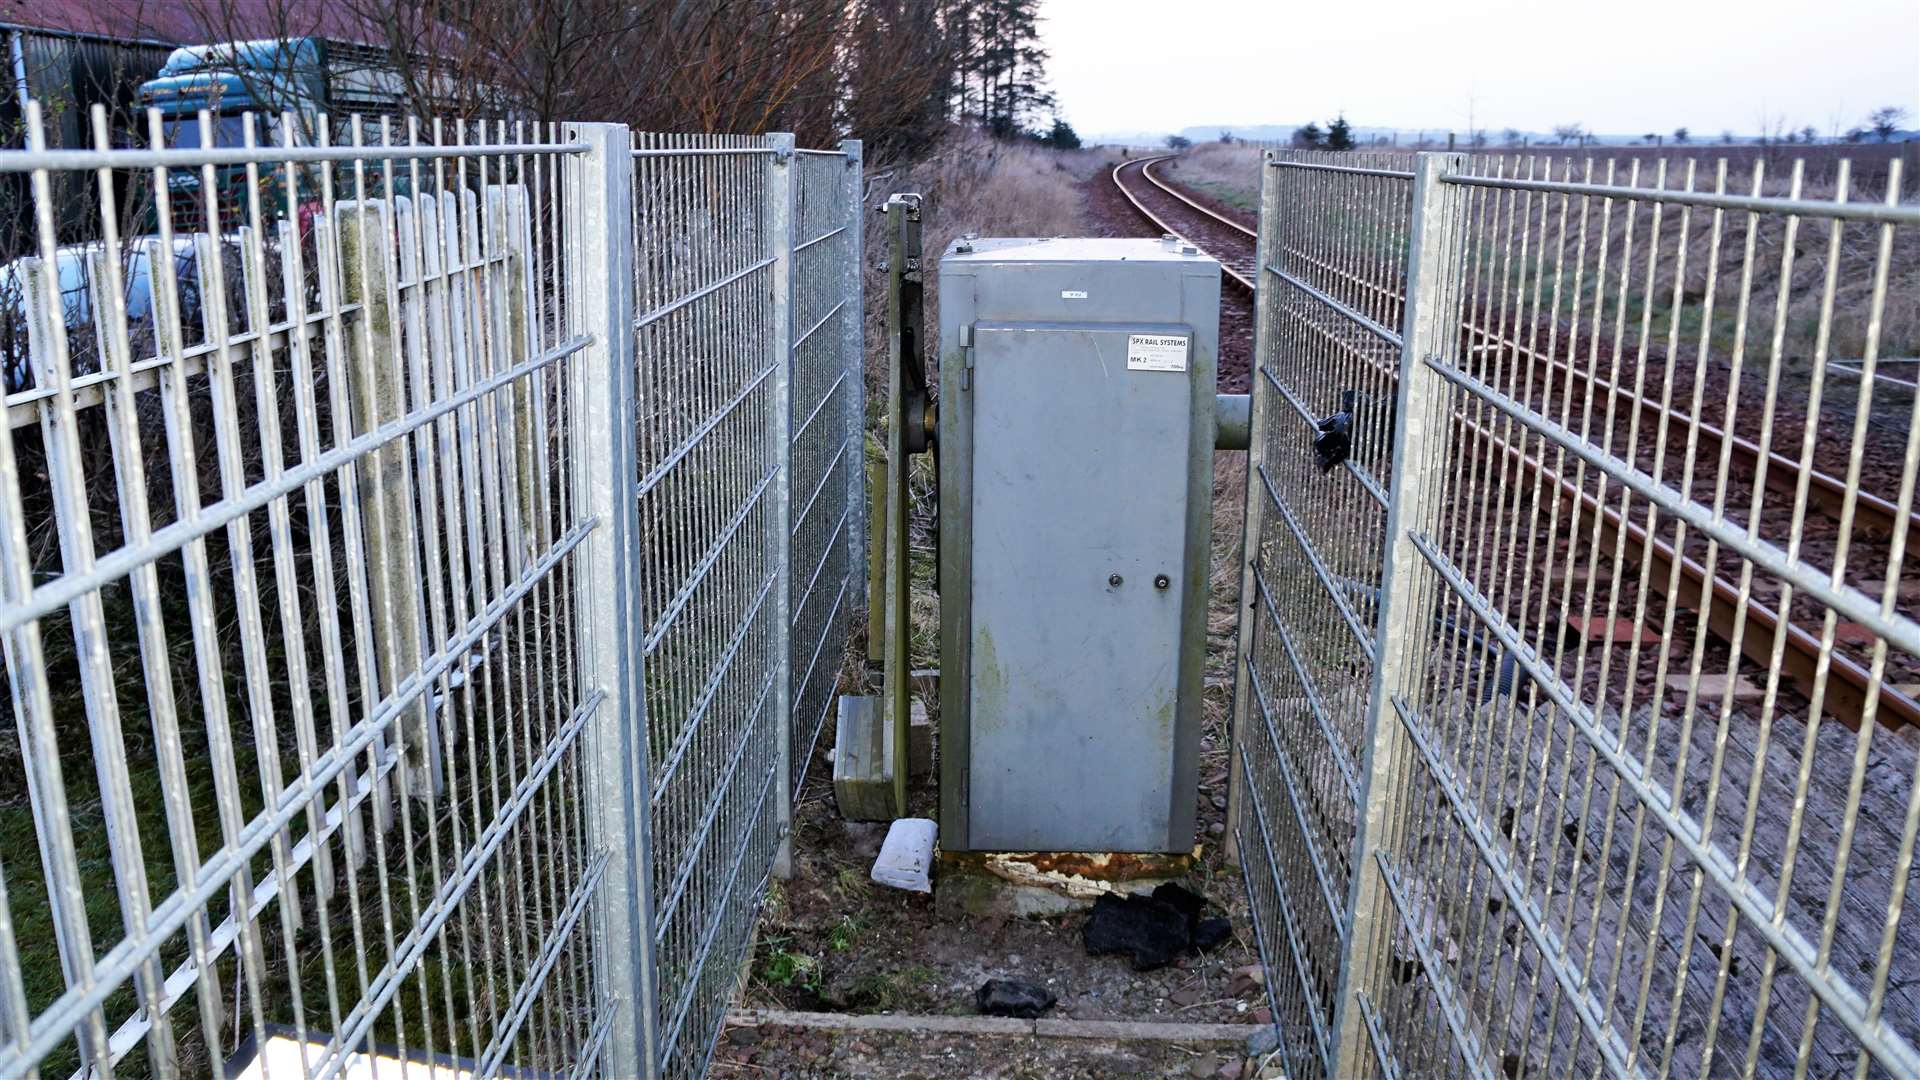 Damage to barrier at Watten level crossing. The arm became detached from this control box due to the high winds. Picture: DGS